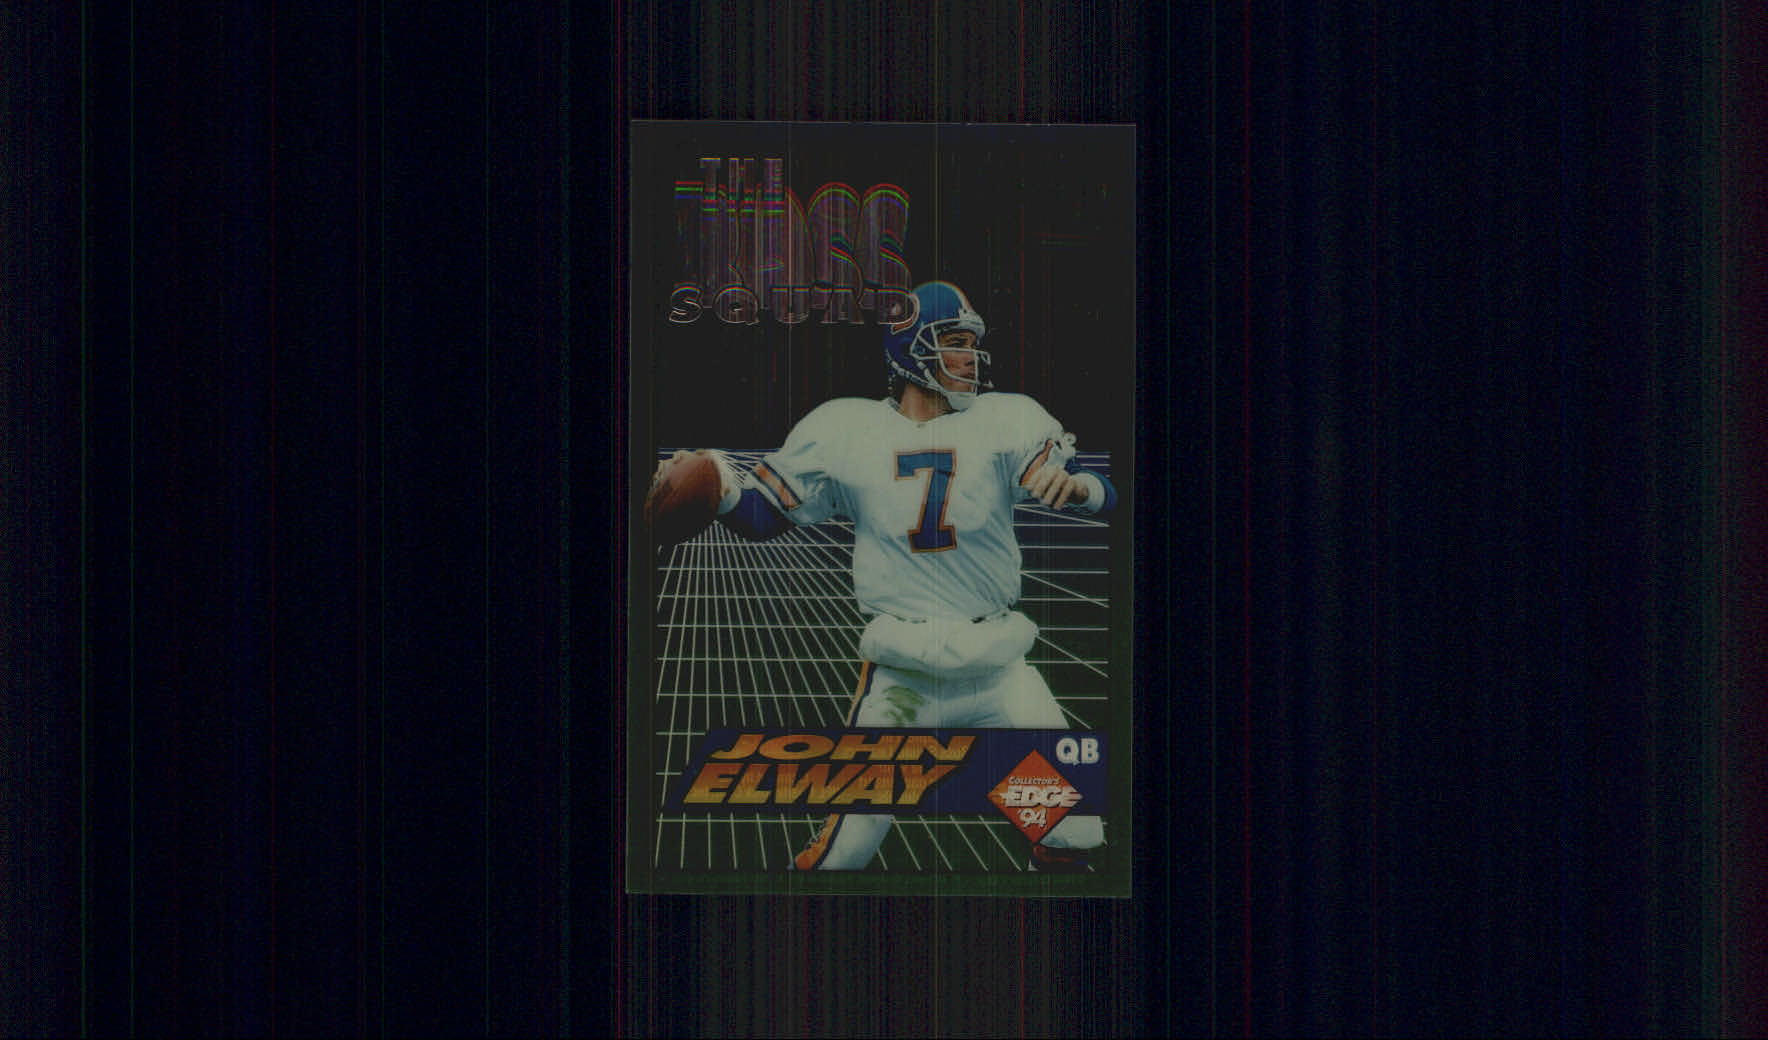 1994 Collector's Edge Boss Squad Silver #1 John Elway W-2